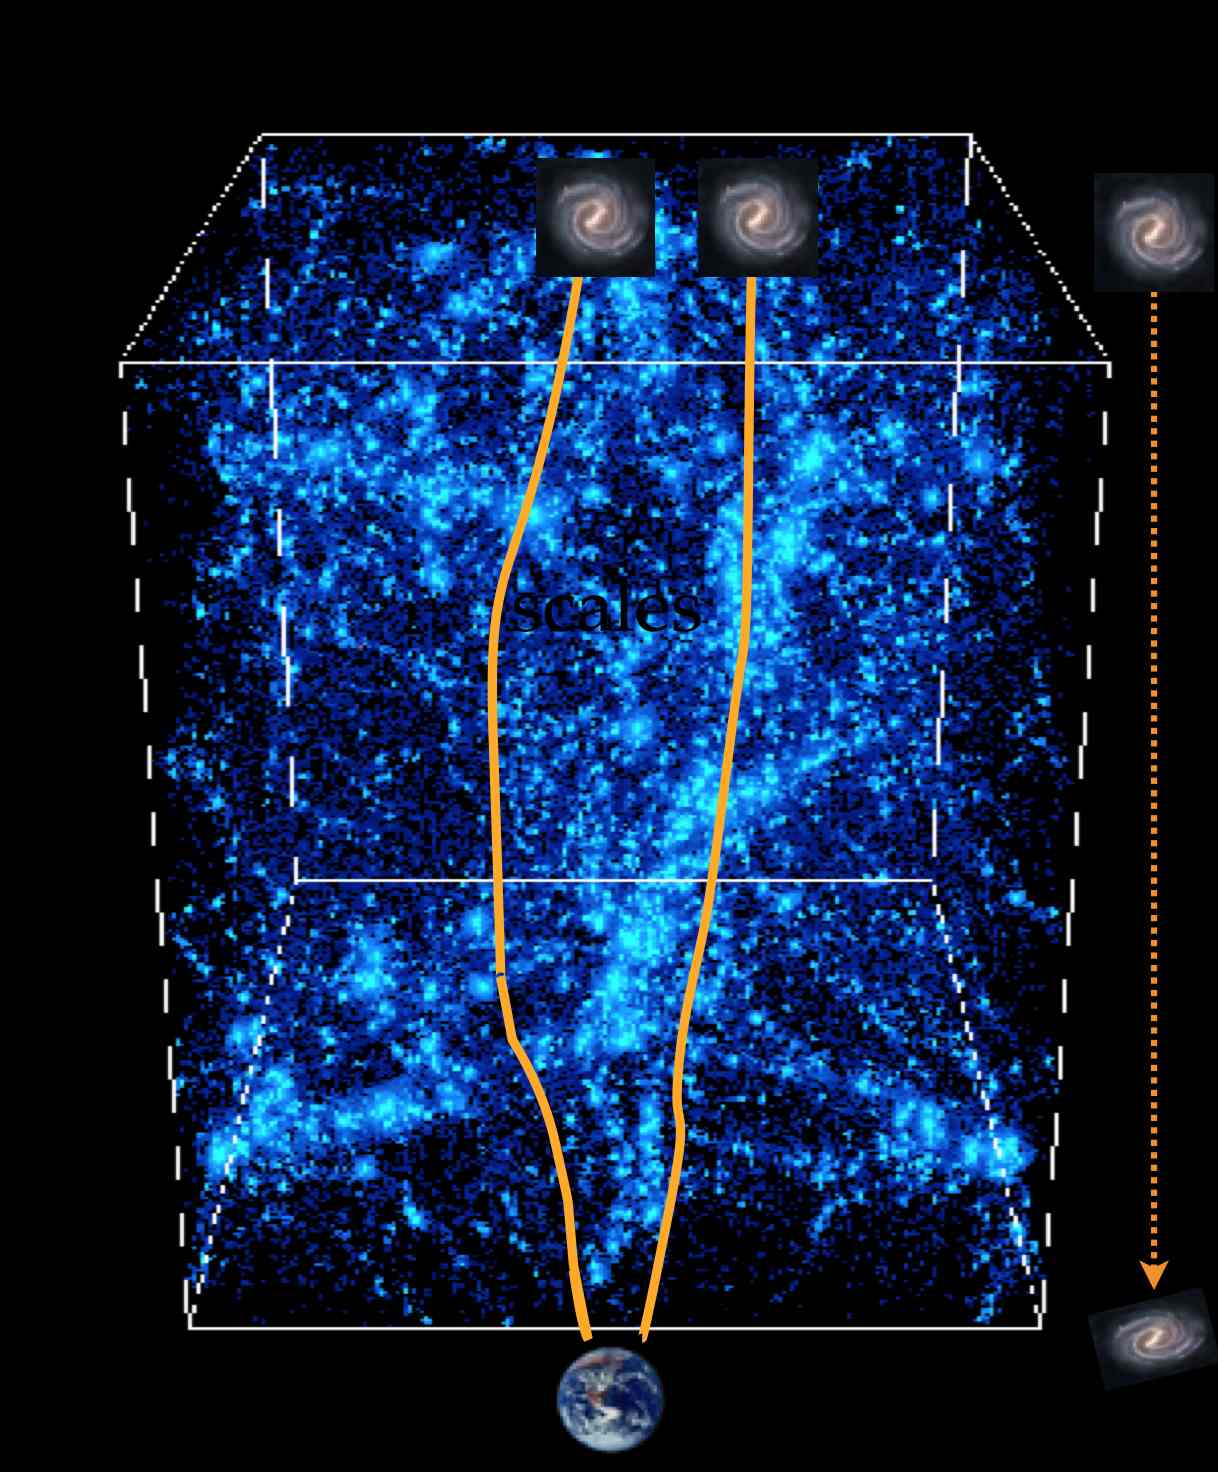 Decoding the Universe from gravitational distorsions